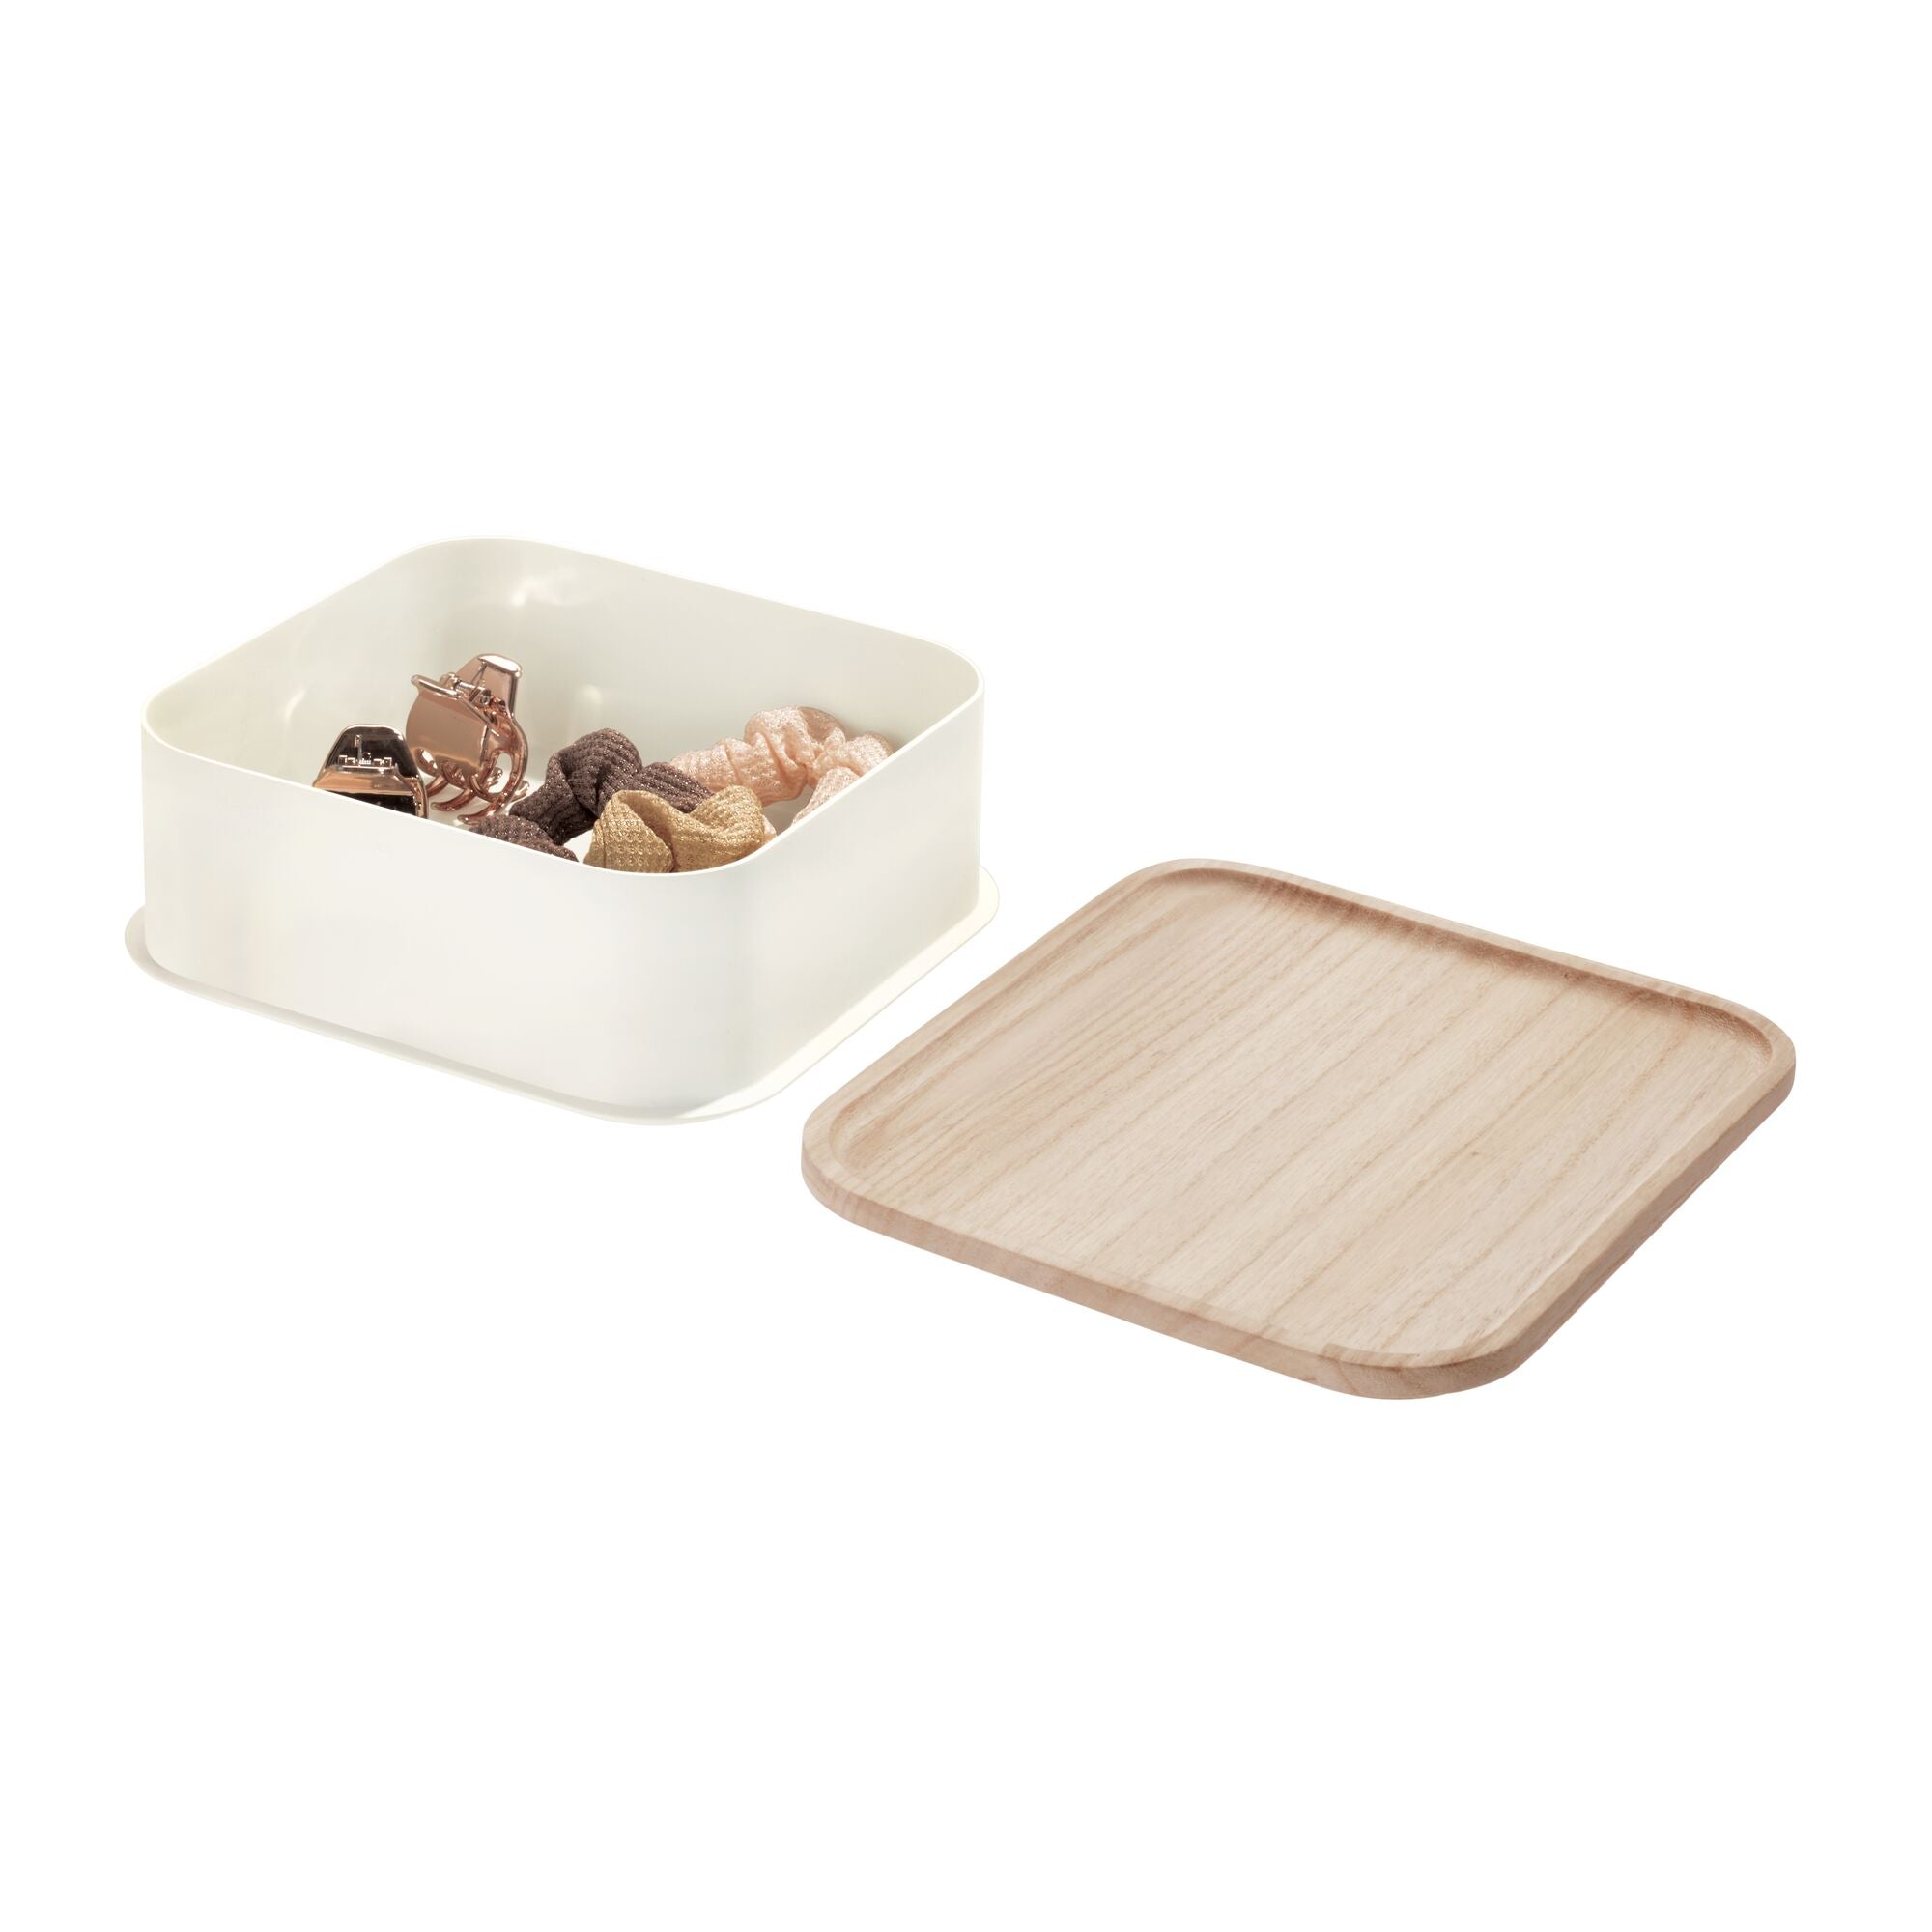 iDesign Eco Divided Food Storage Container Made from Recycled Plastic with Lids, Set of 2, Coconut 95538N